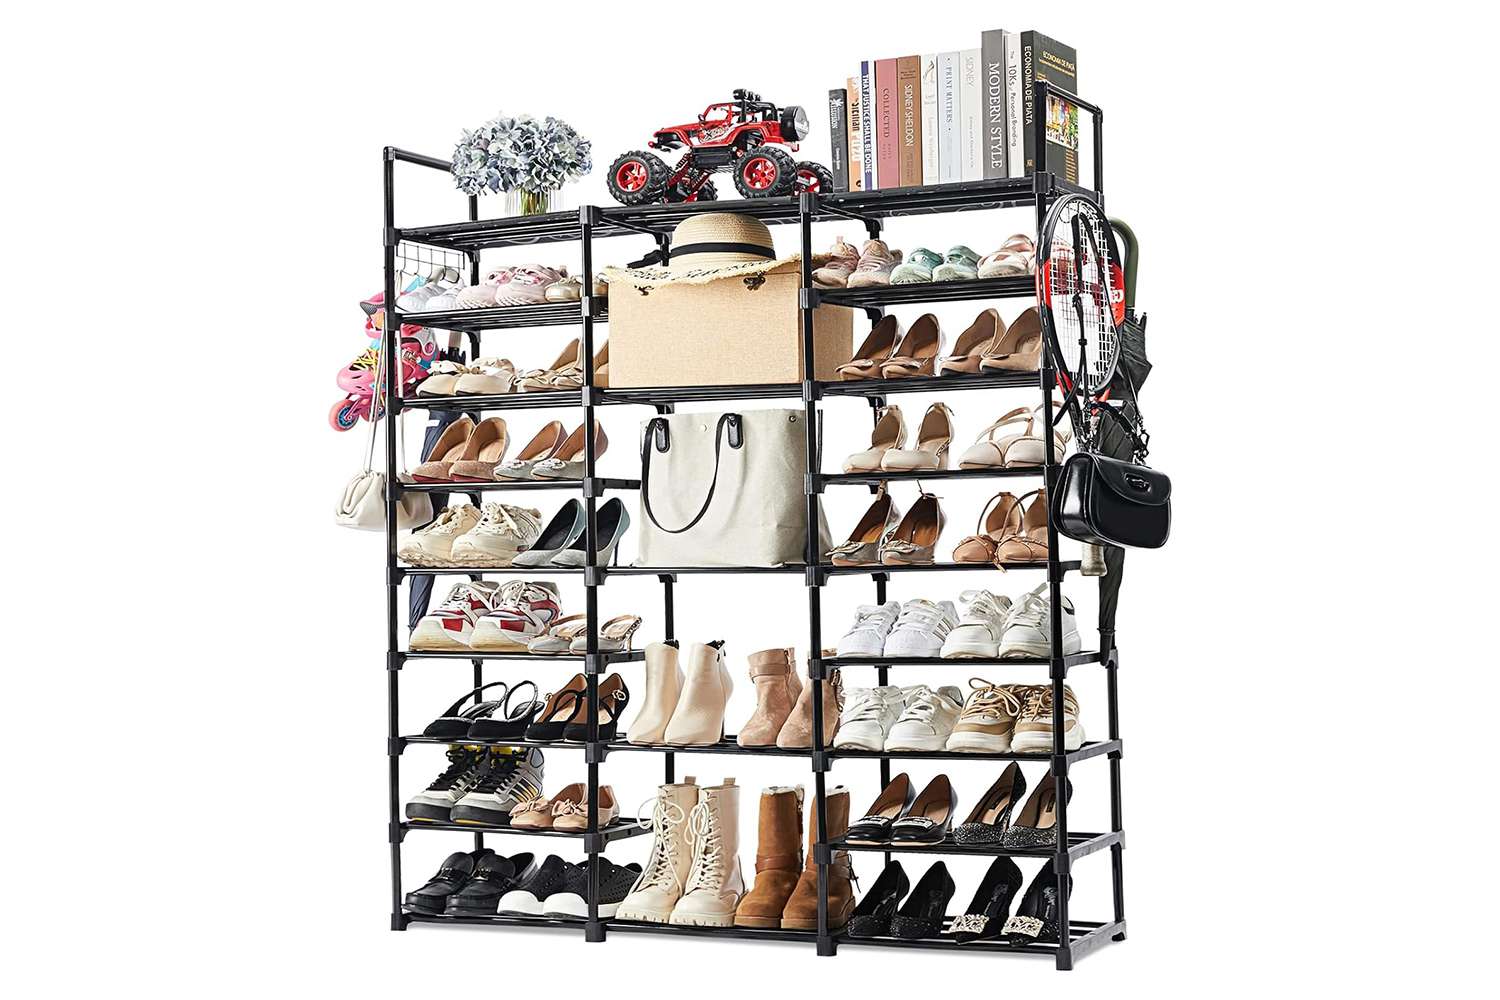 Amazon Mavivegue 9-Tier Metal Shoe Rack - Holds 50-55 Pairs, Tall Storage Shelf for Shoes, Boots, Entryway, Closet, Garage